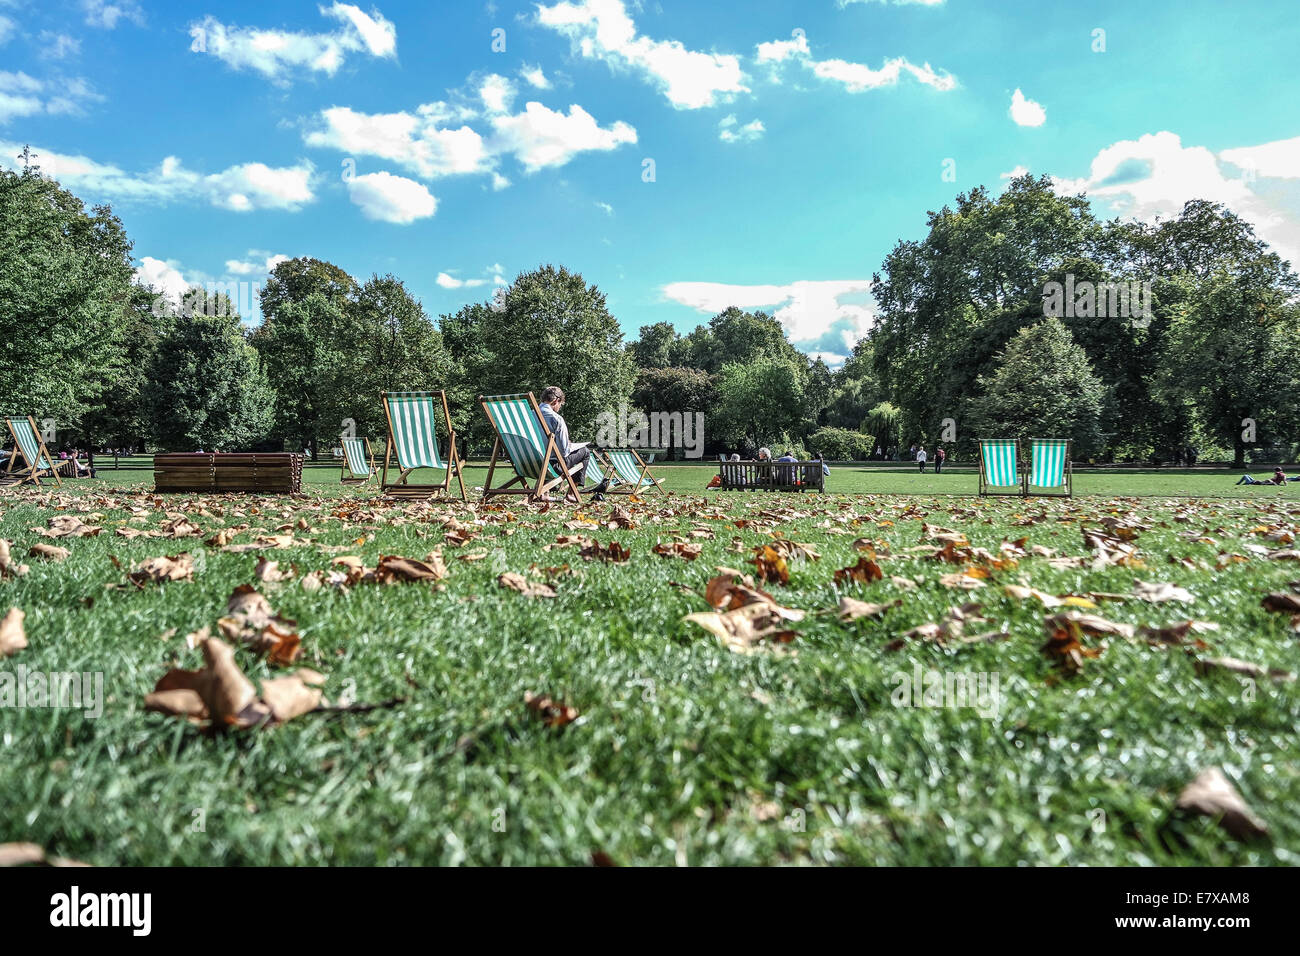 A beautiful day in a London Park autumn leaves on the ground. Deck chairs in the Sun with a blue sky with clouds Stock Photo